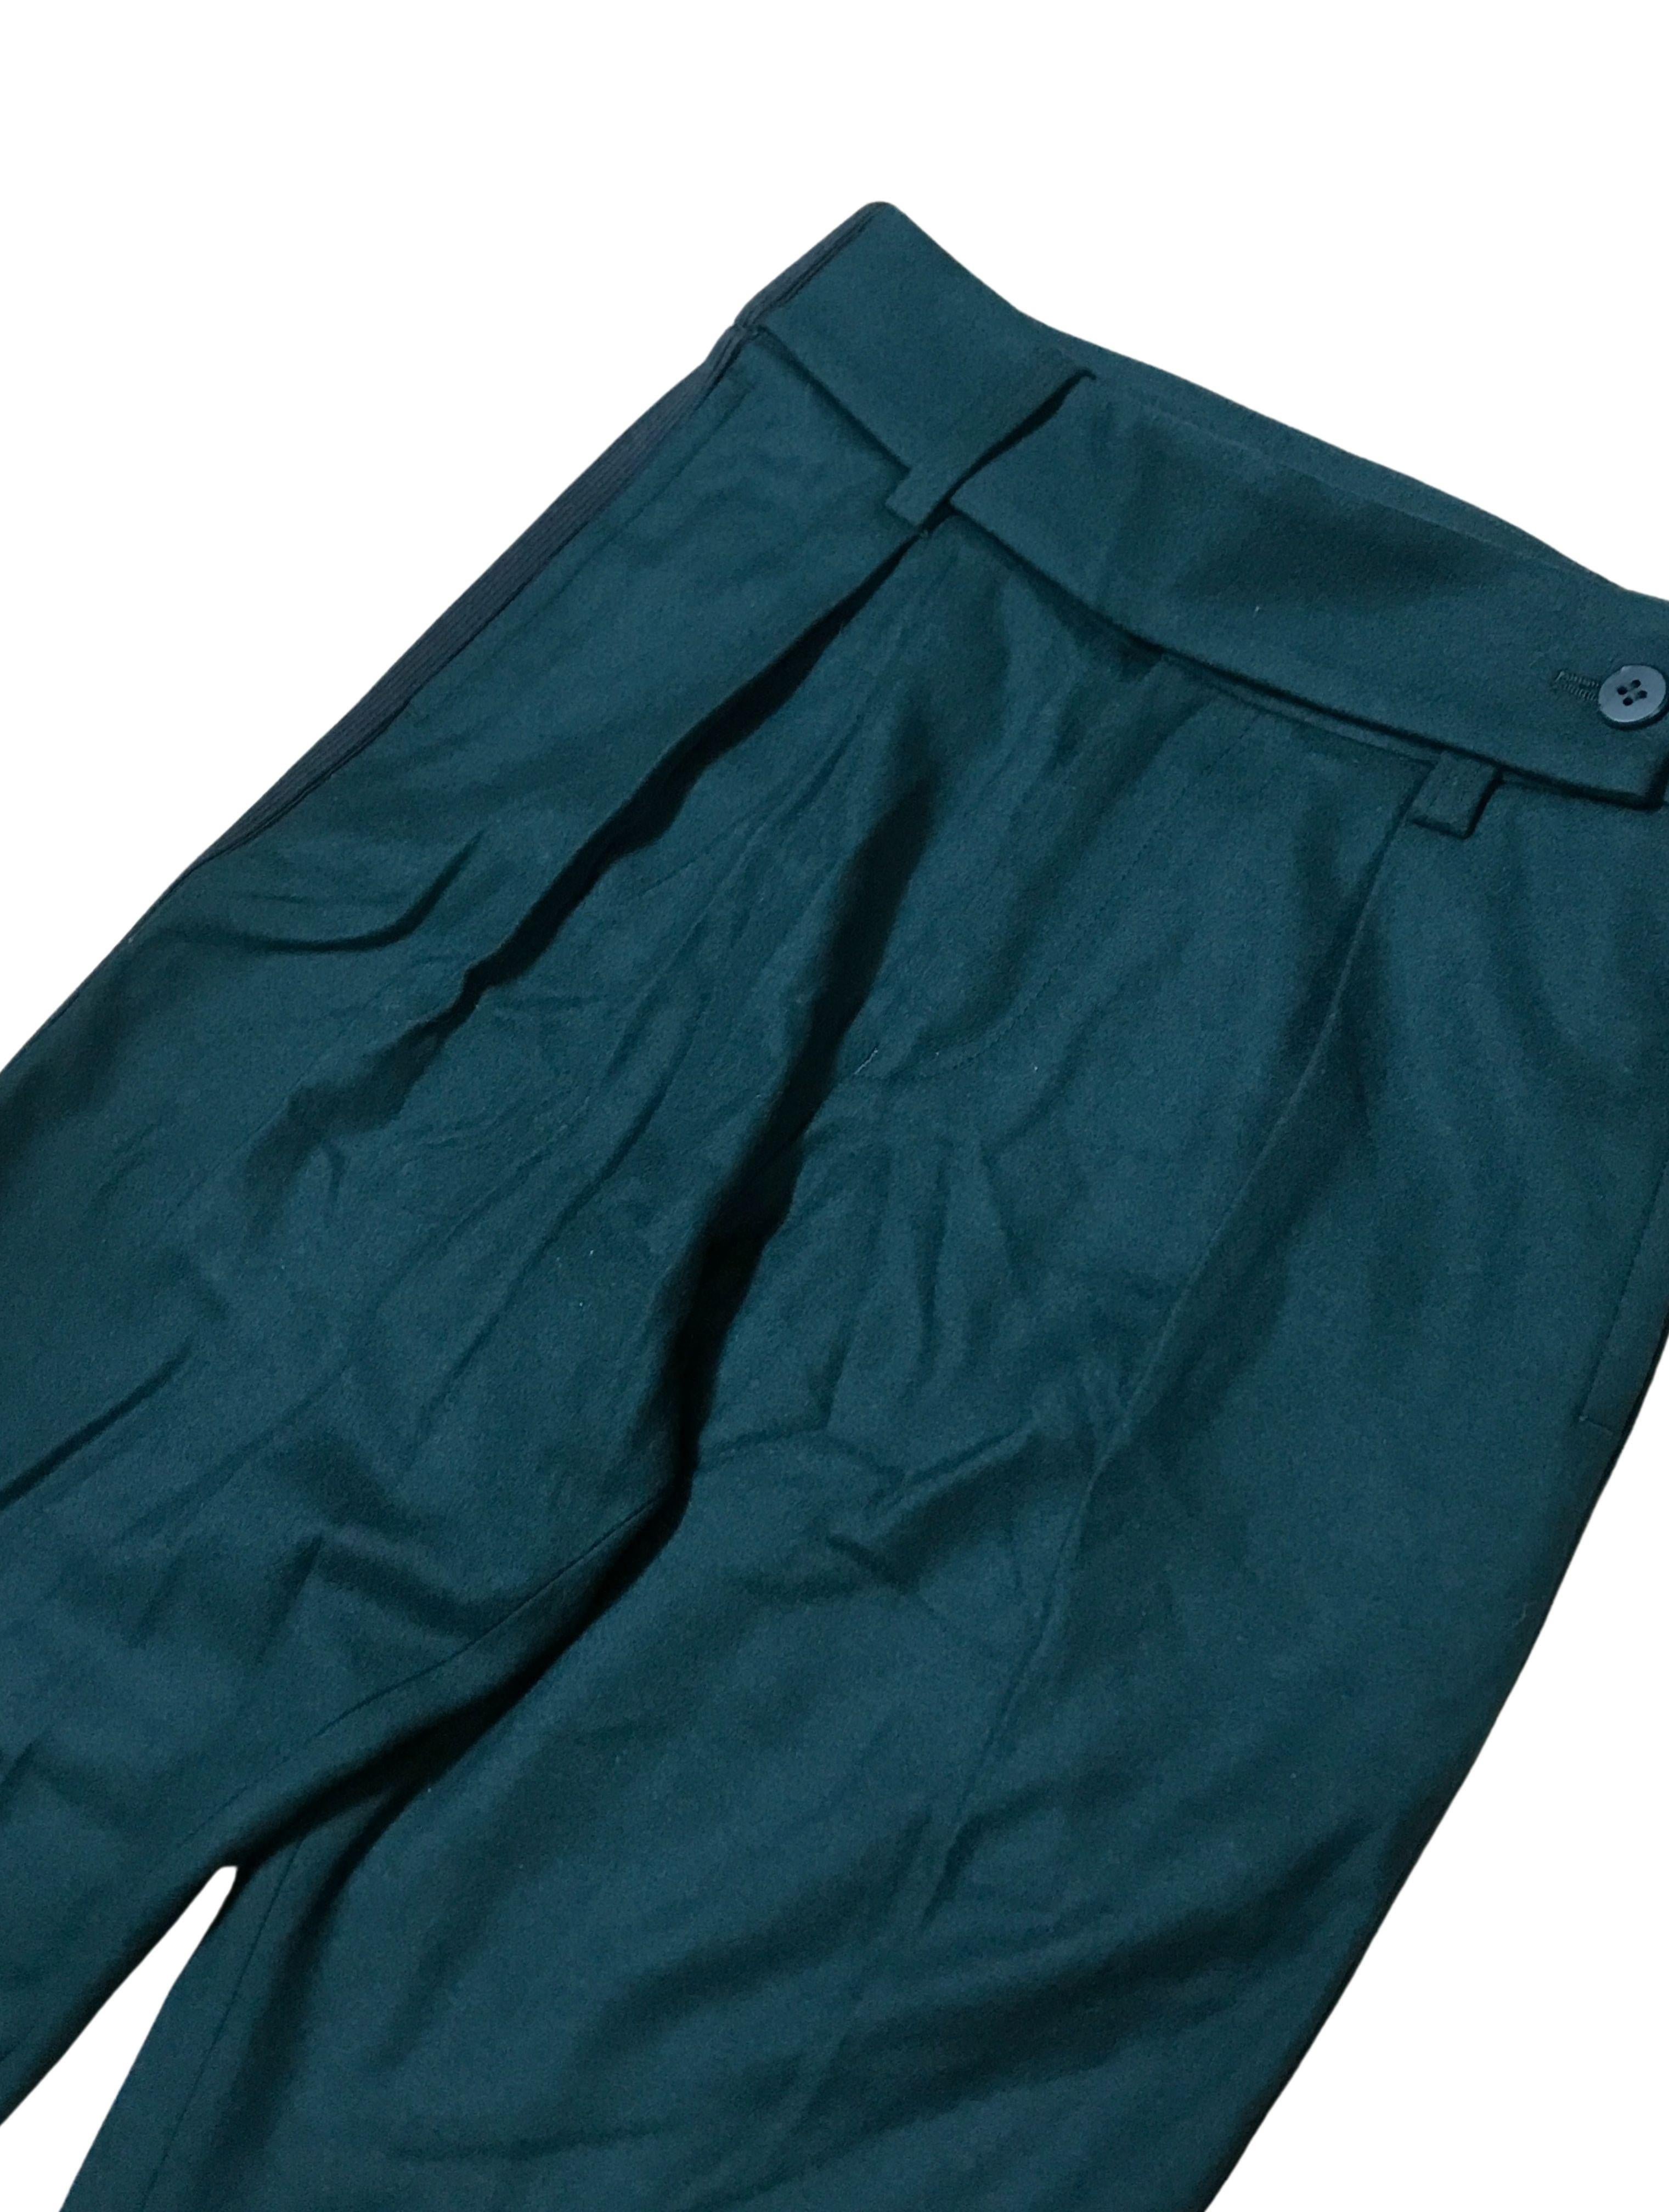 Issey Miyake Wool-Blended Straight Fit Pants In Excellent Condition For Sale In Tương Mai Ward, Hoang Mai District